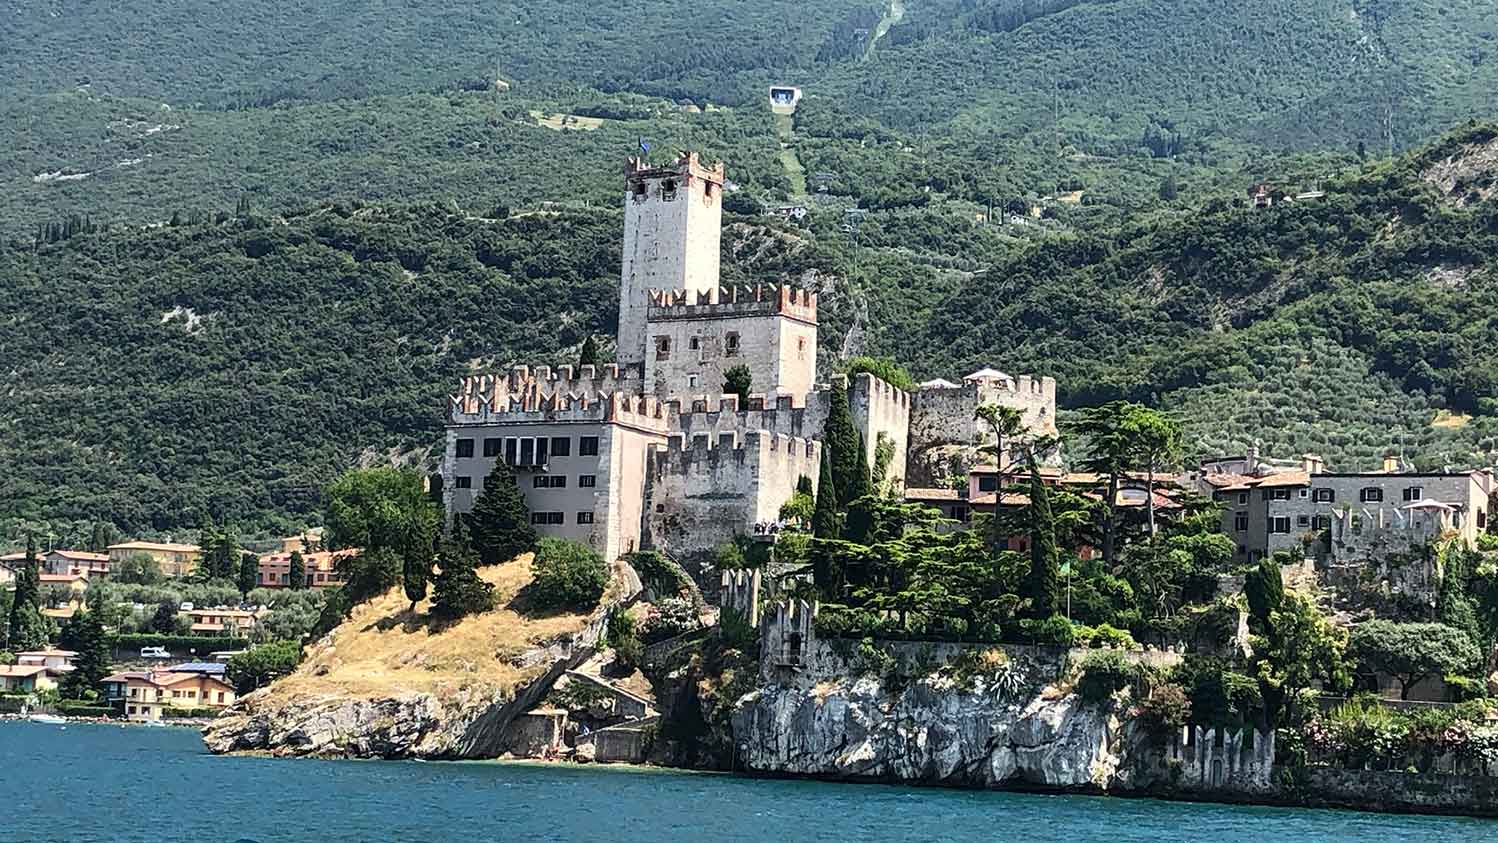 View of Malcesine, Lake Garda Italy from the ferry